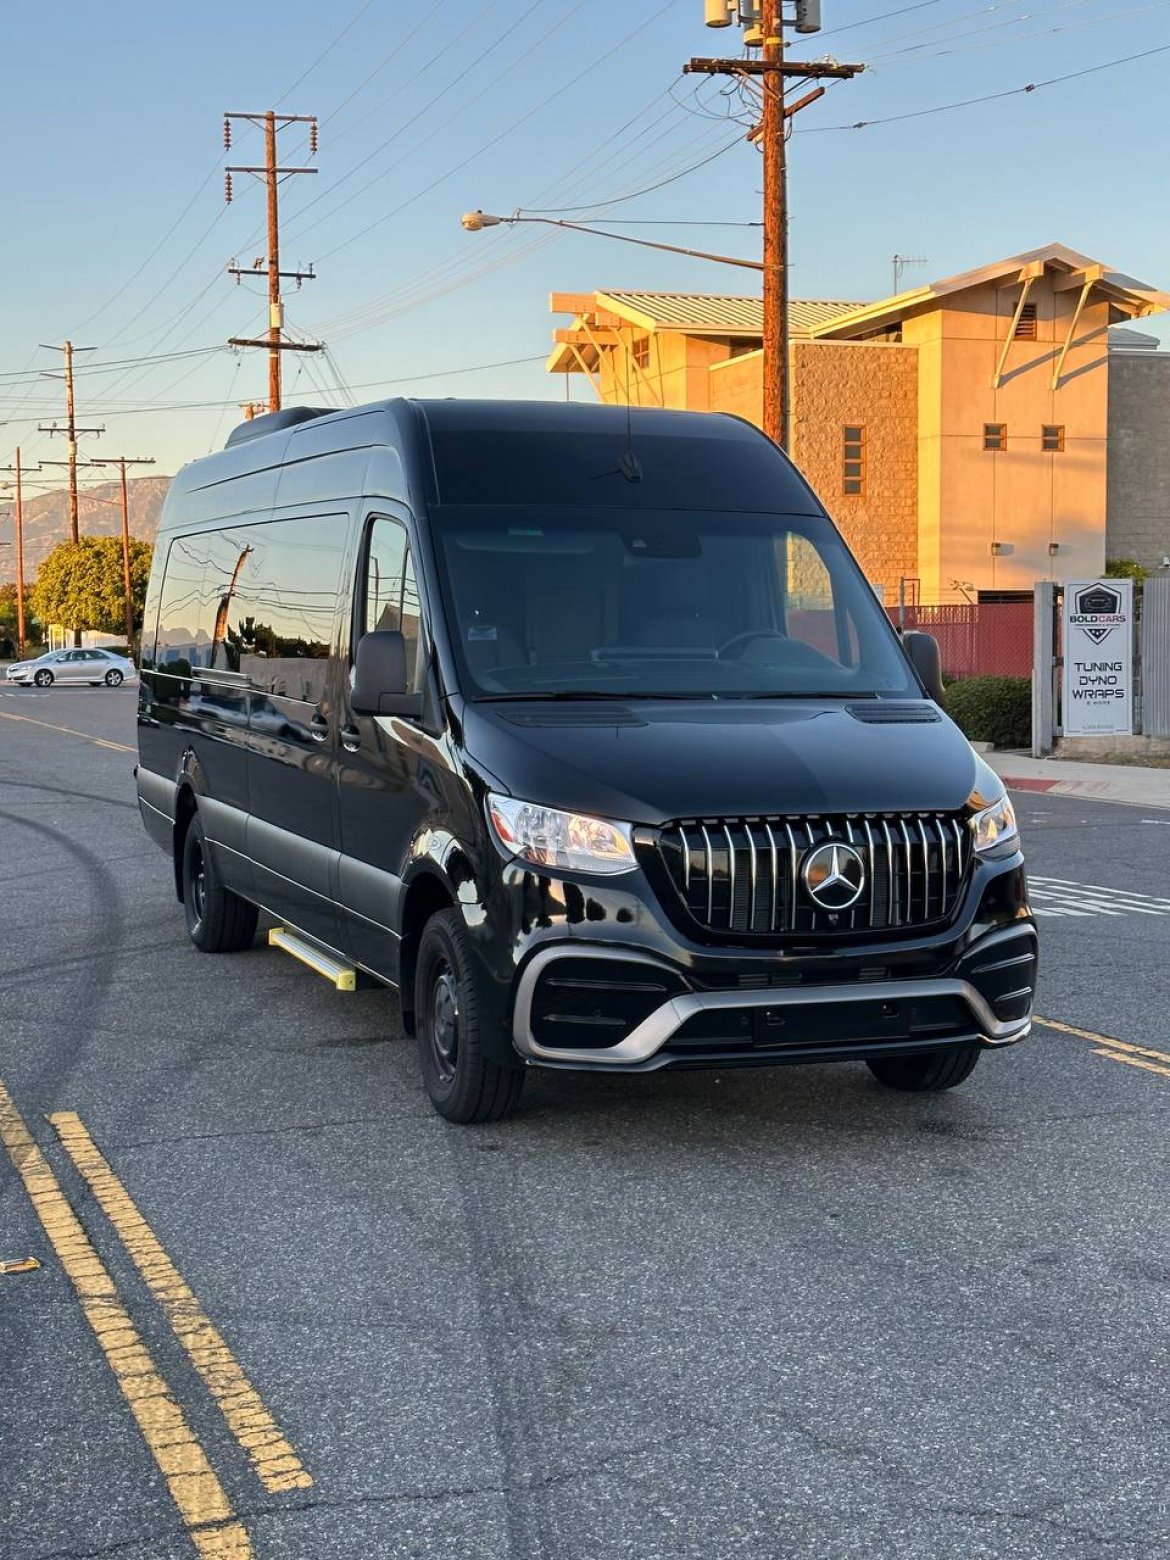 Executive Shuttle for sale: 2022 Mercedes-Benz 3500 sprinter v6 3.0 by Sprinter system and automation